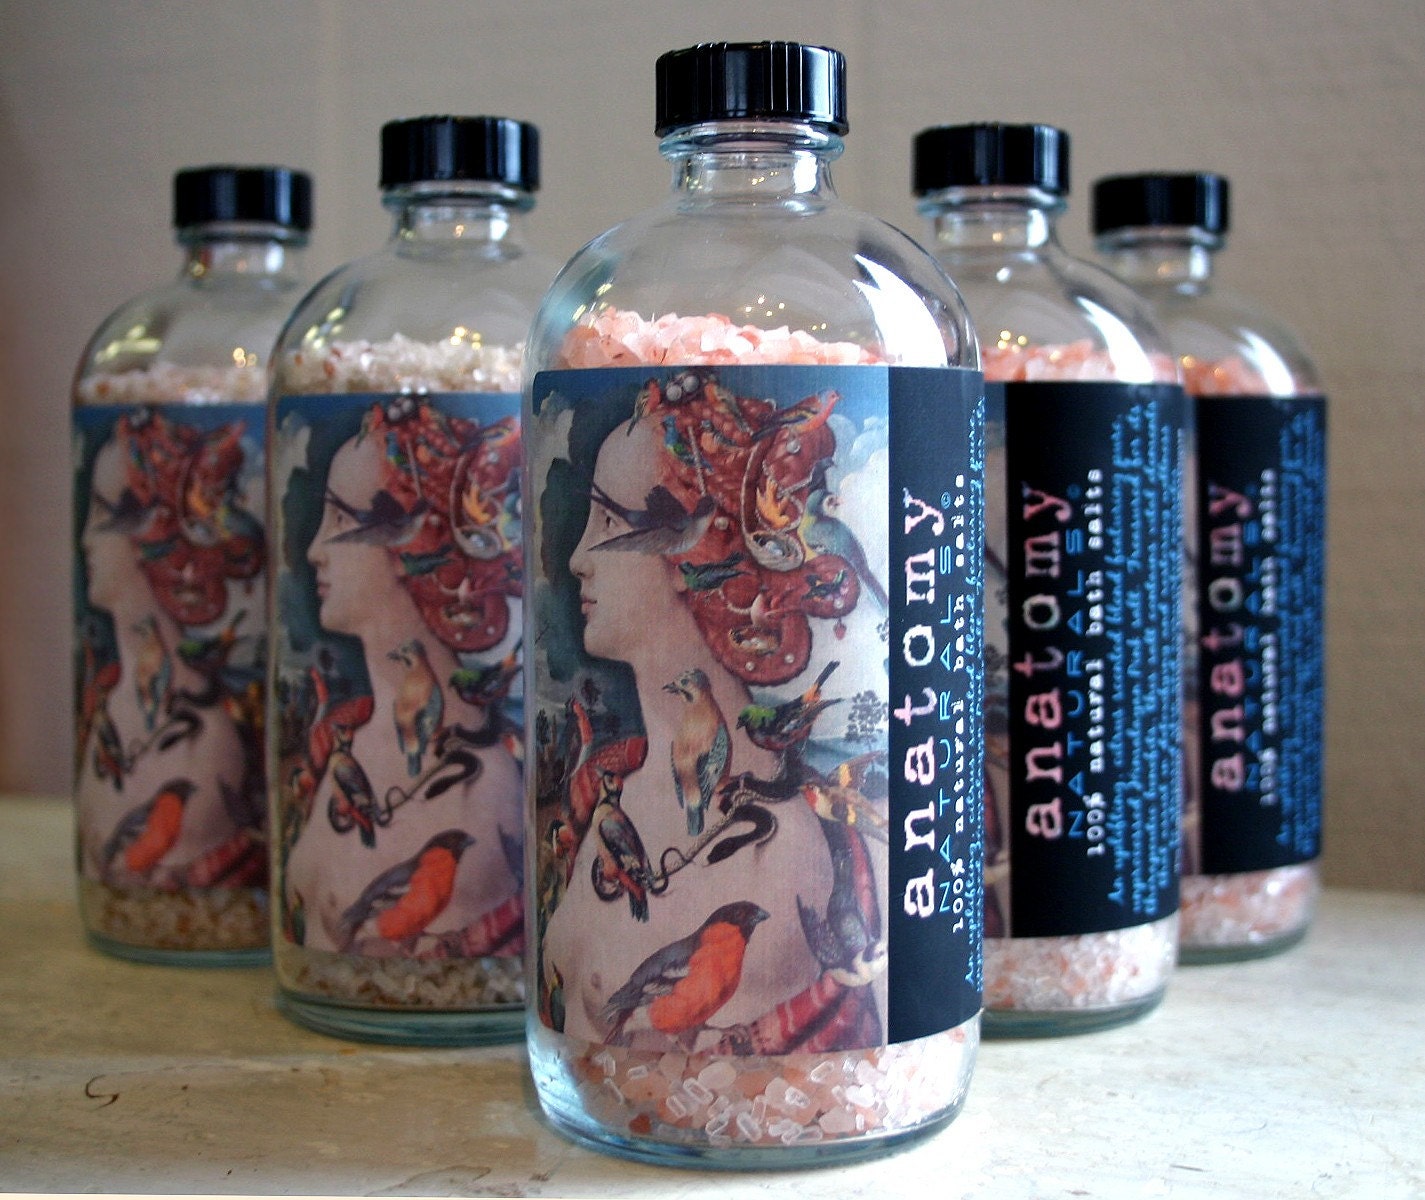 Natural pink bath salts soothing relaxing citrus scent with pretty art collage label